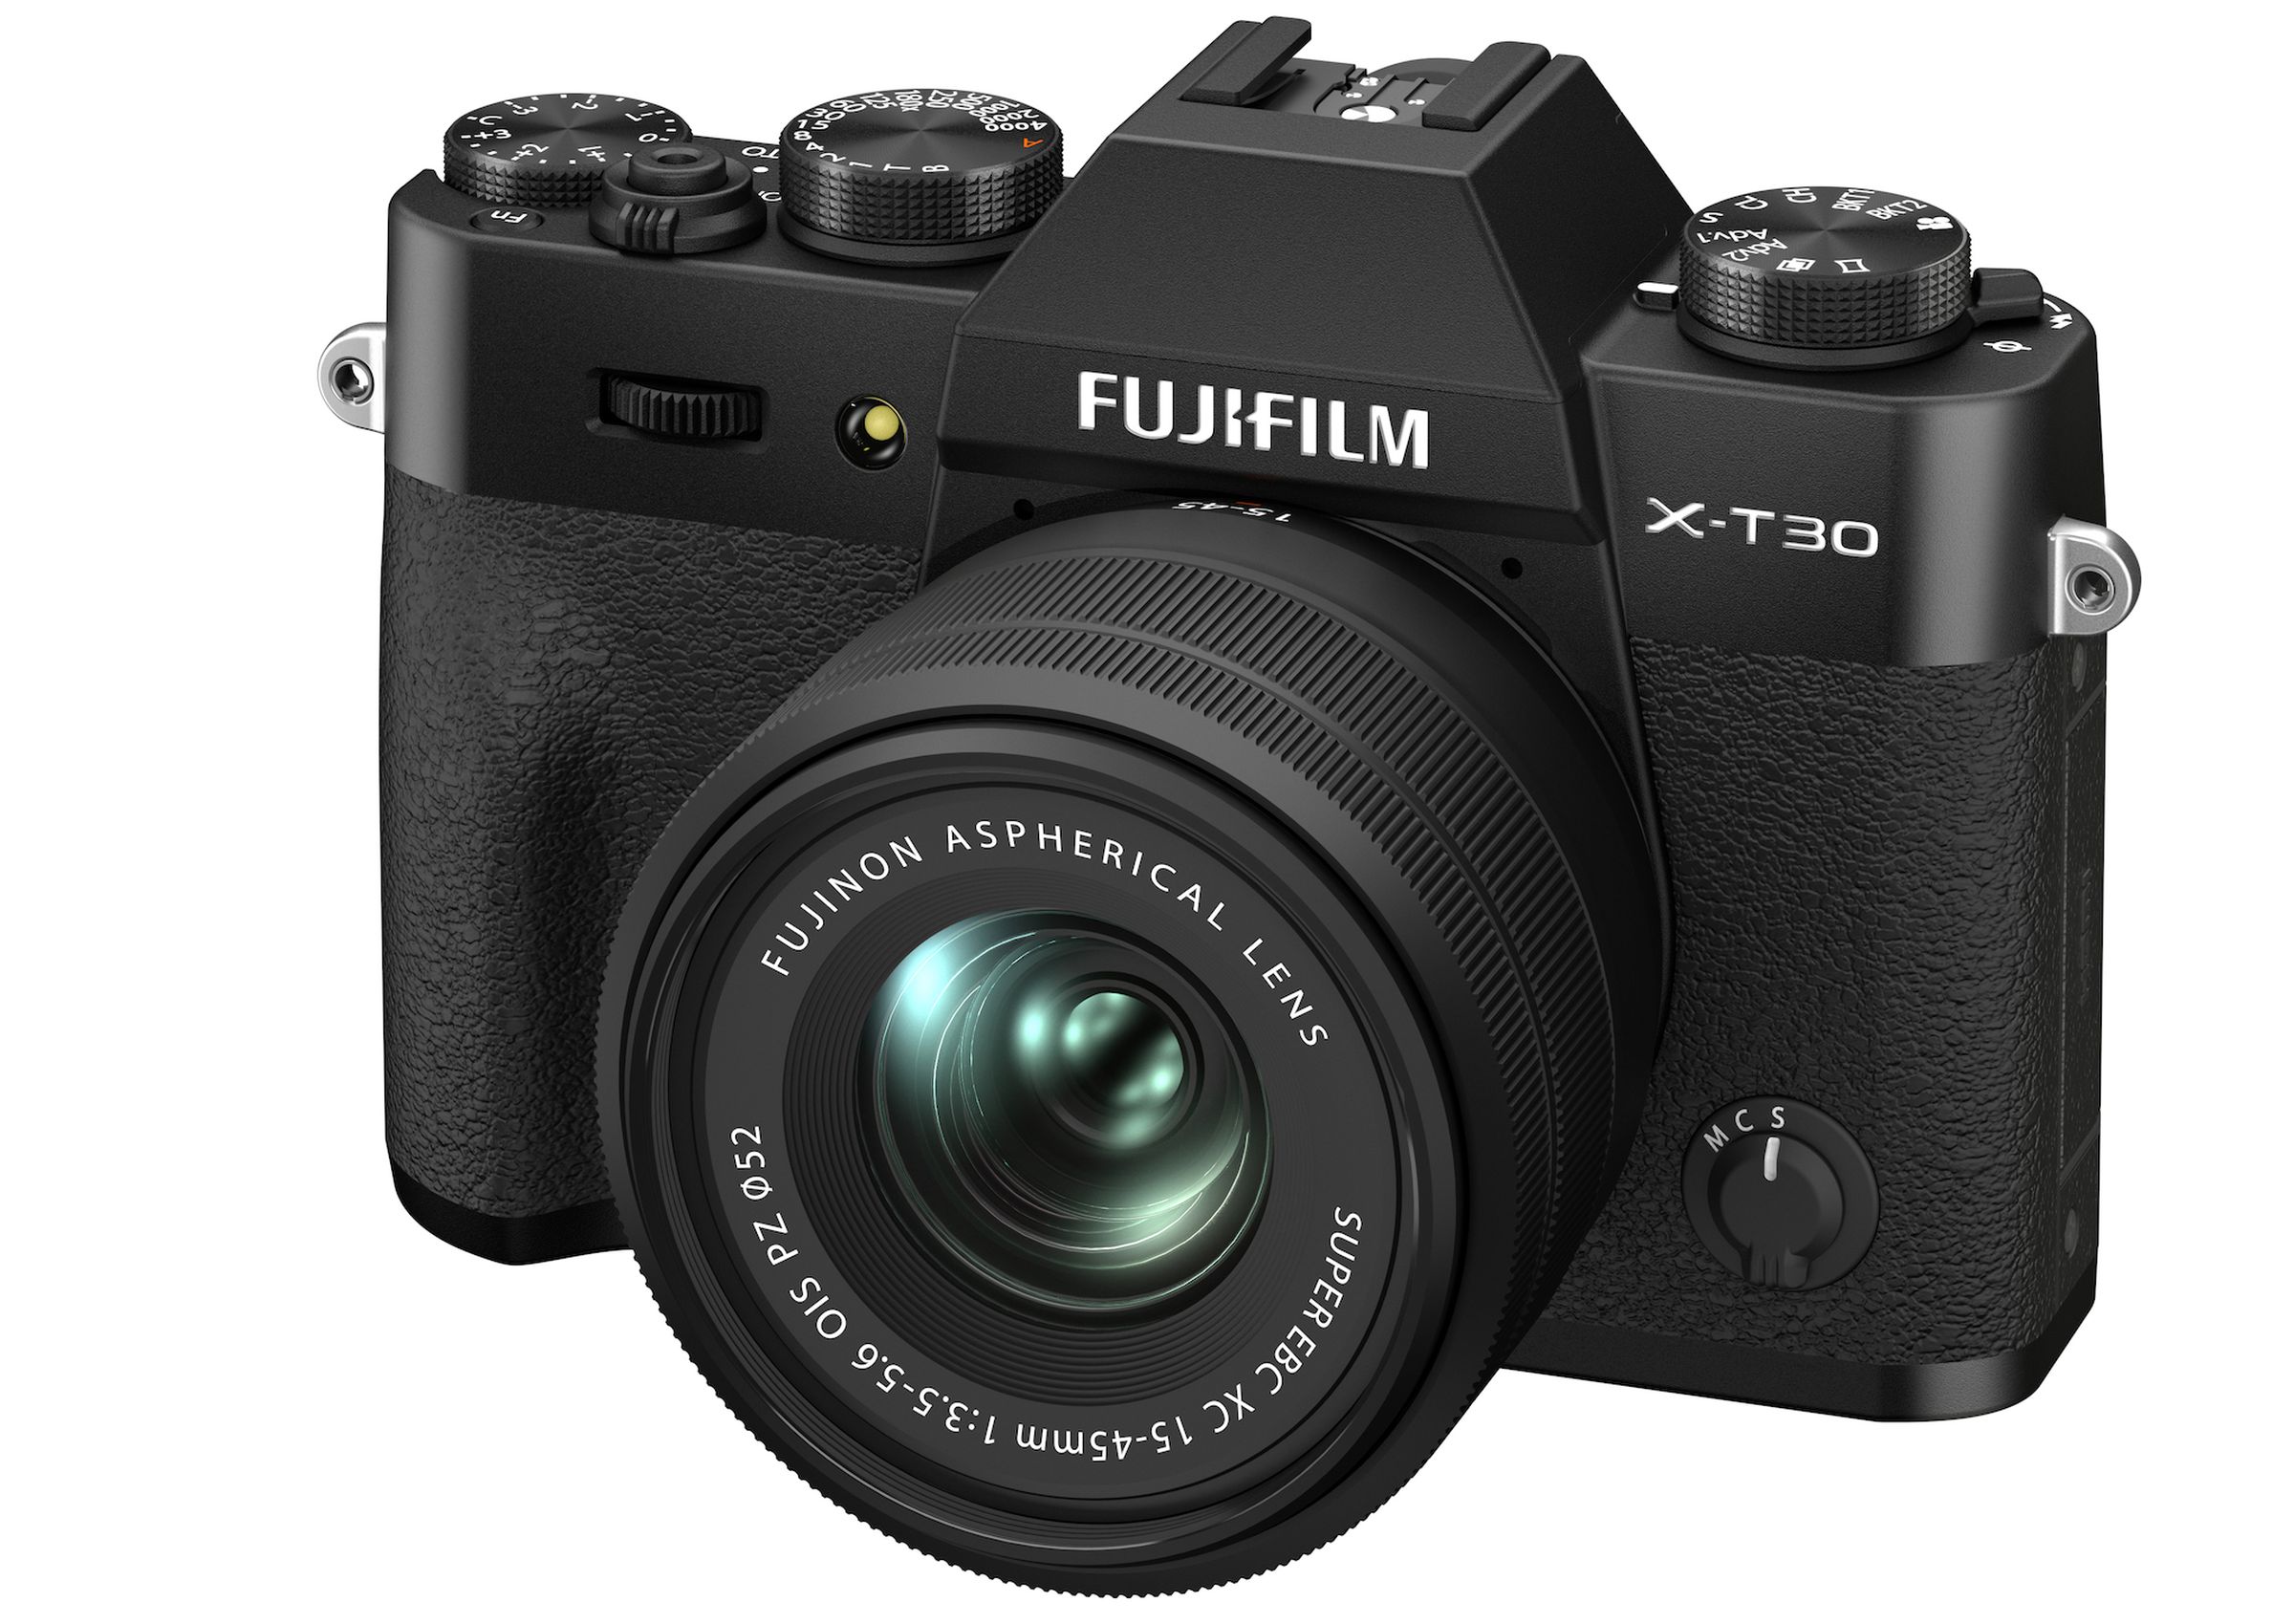 The X-T30 II is an extremely similar camera to its predecessor.